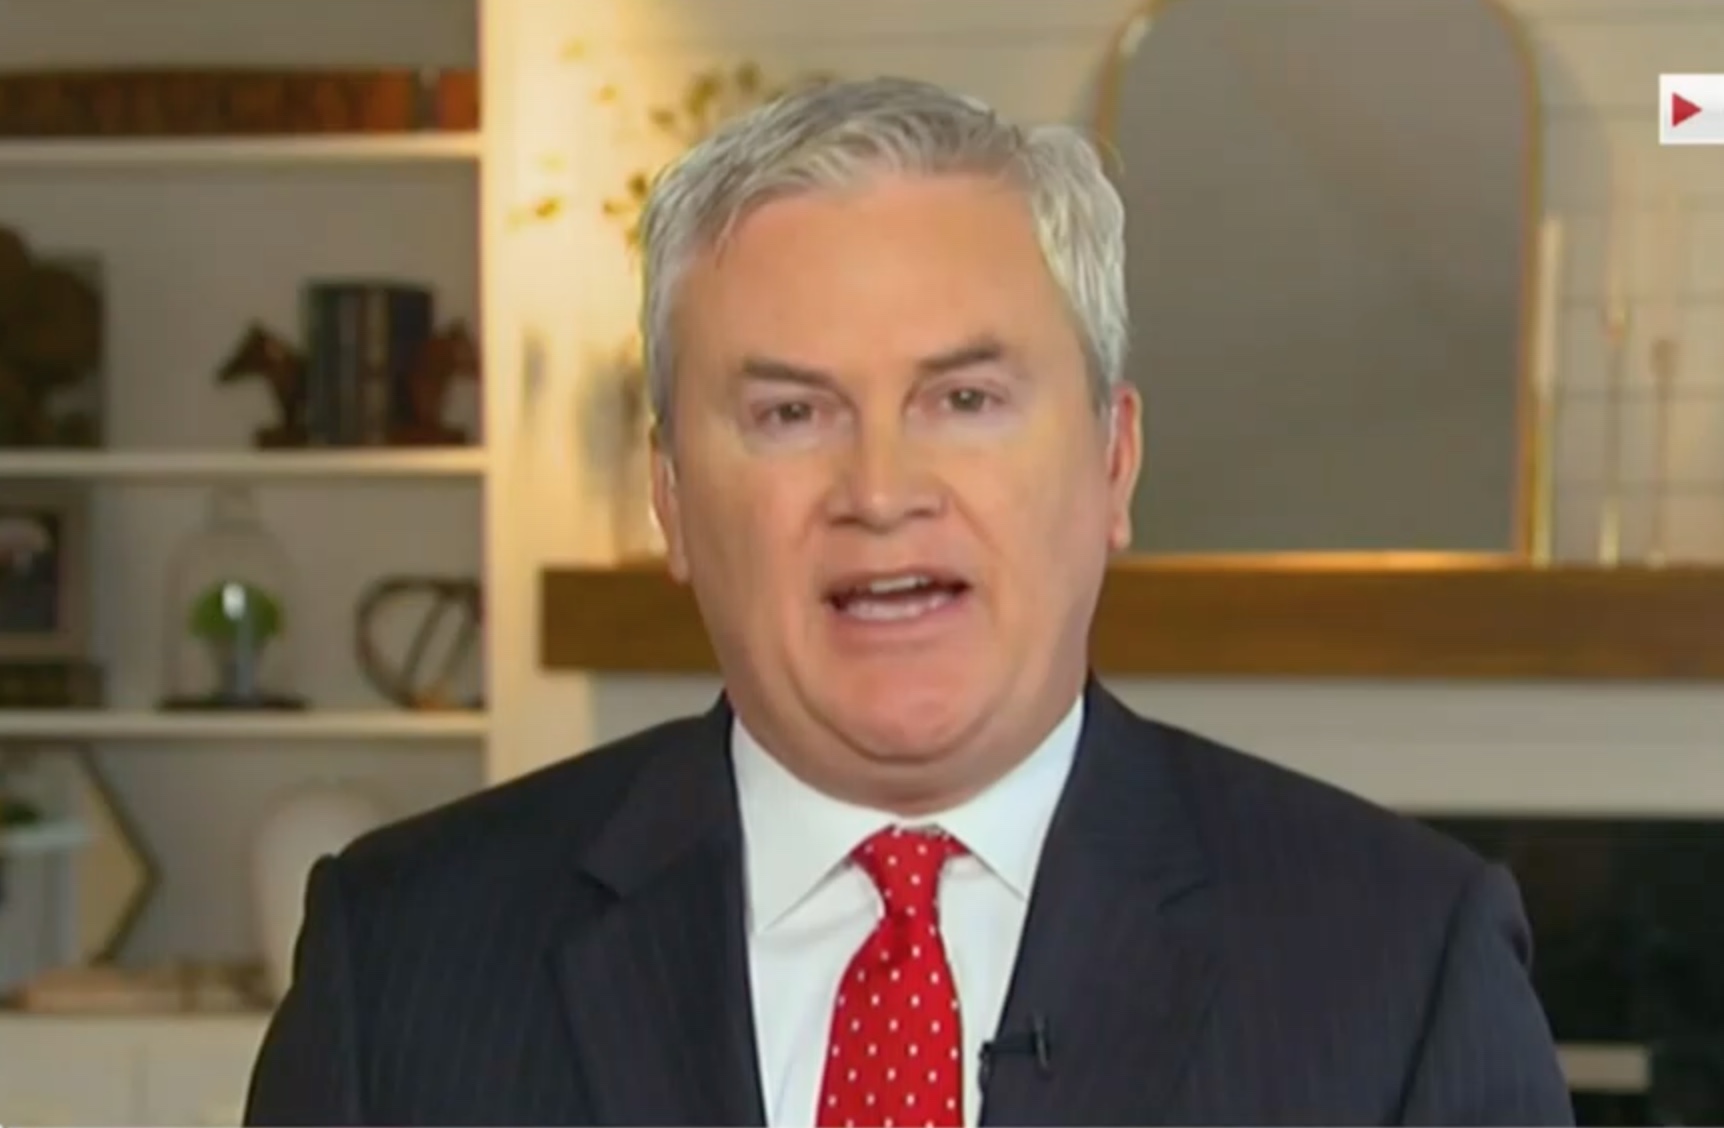 James Comer Concedes It’d Be Politically Unsustainable for Him to Investigate Jared Kushner’s Business Dealings (mediaite.com)